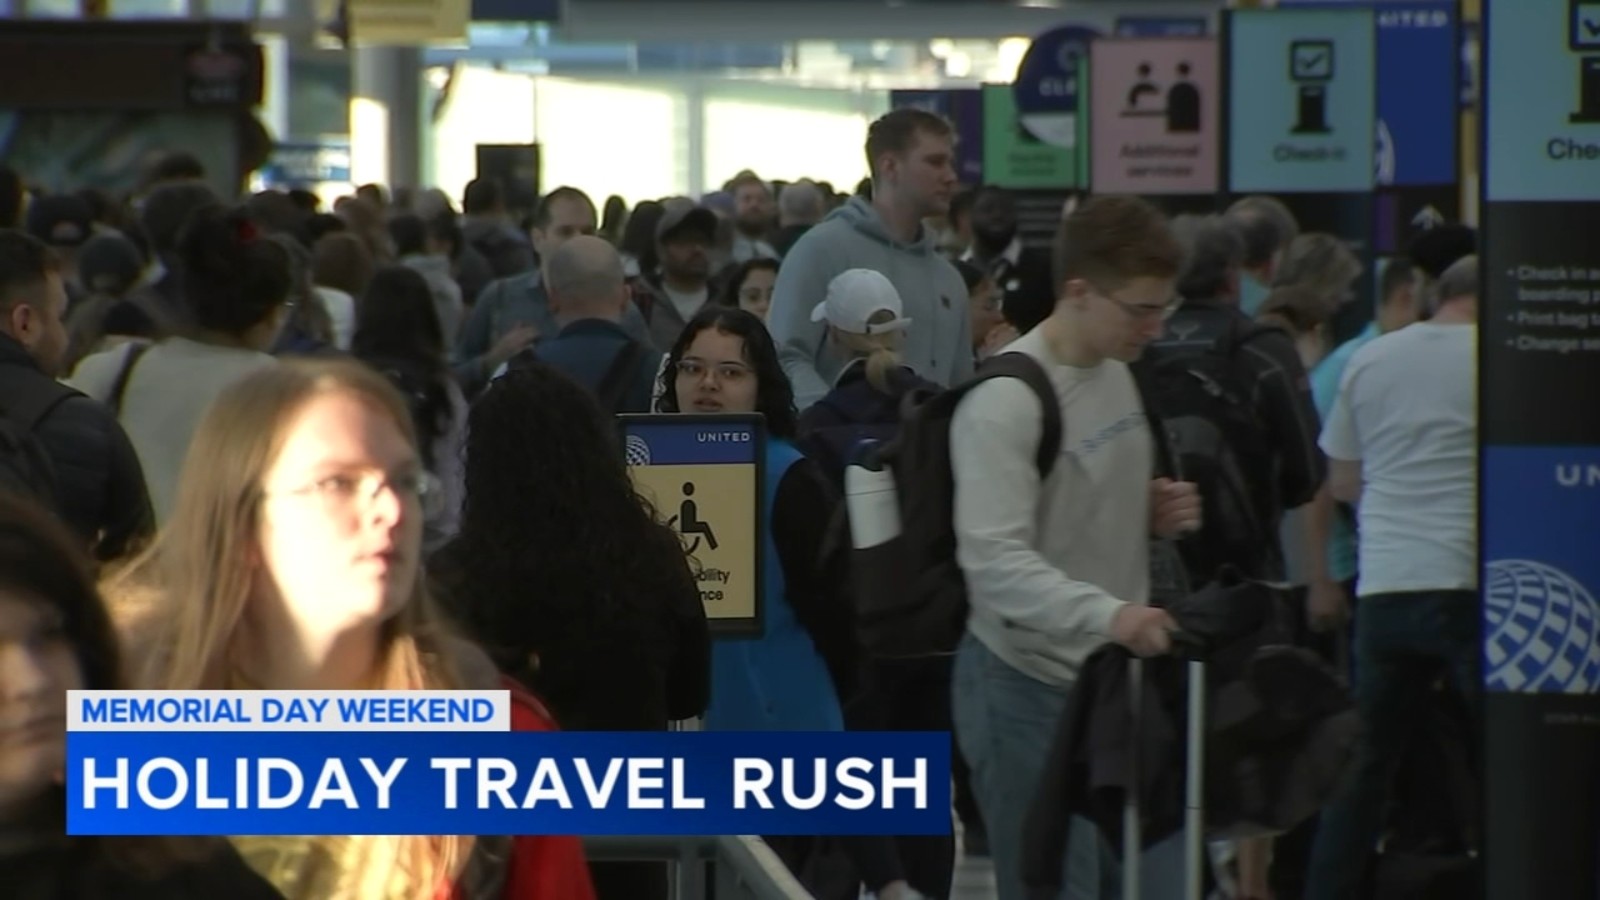 Memorial Day weekend travelers pack Chicago roads, O'Hare and Midway airports